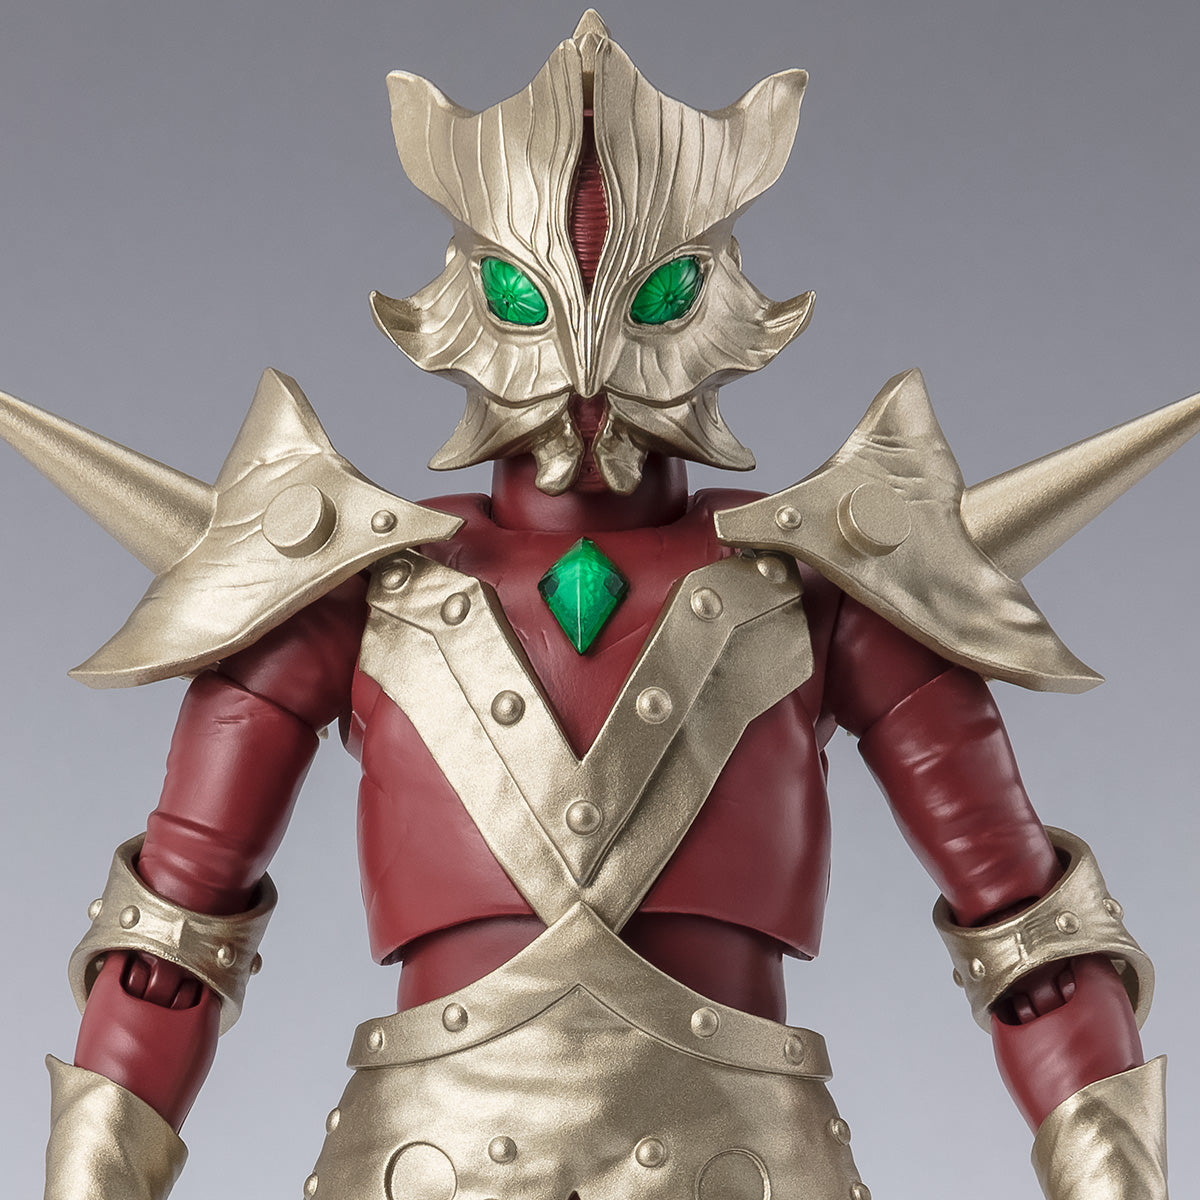 Bandai - S.H.Figuarts - Ultraman Ace - Ace Killer (5 Stars Scattered in the Galaxy) - Marvelous Toys